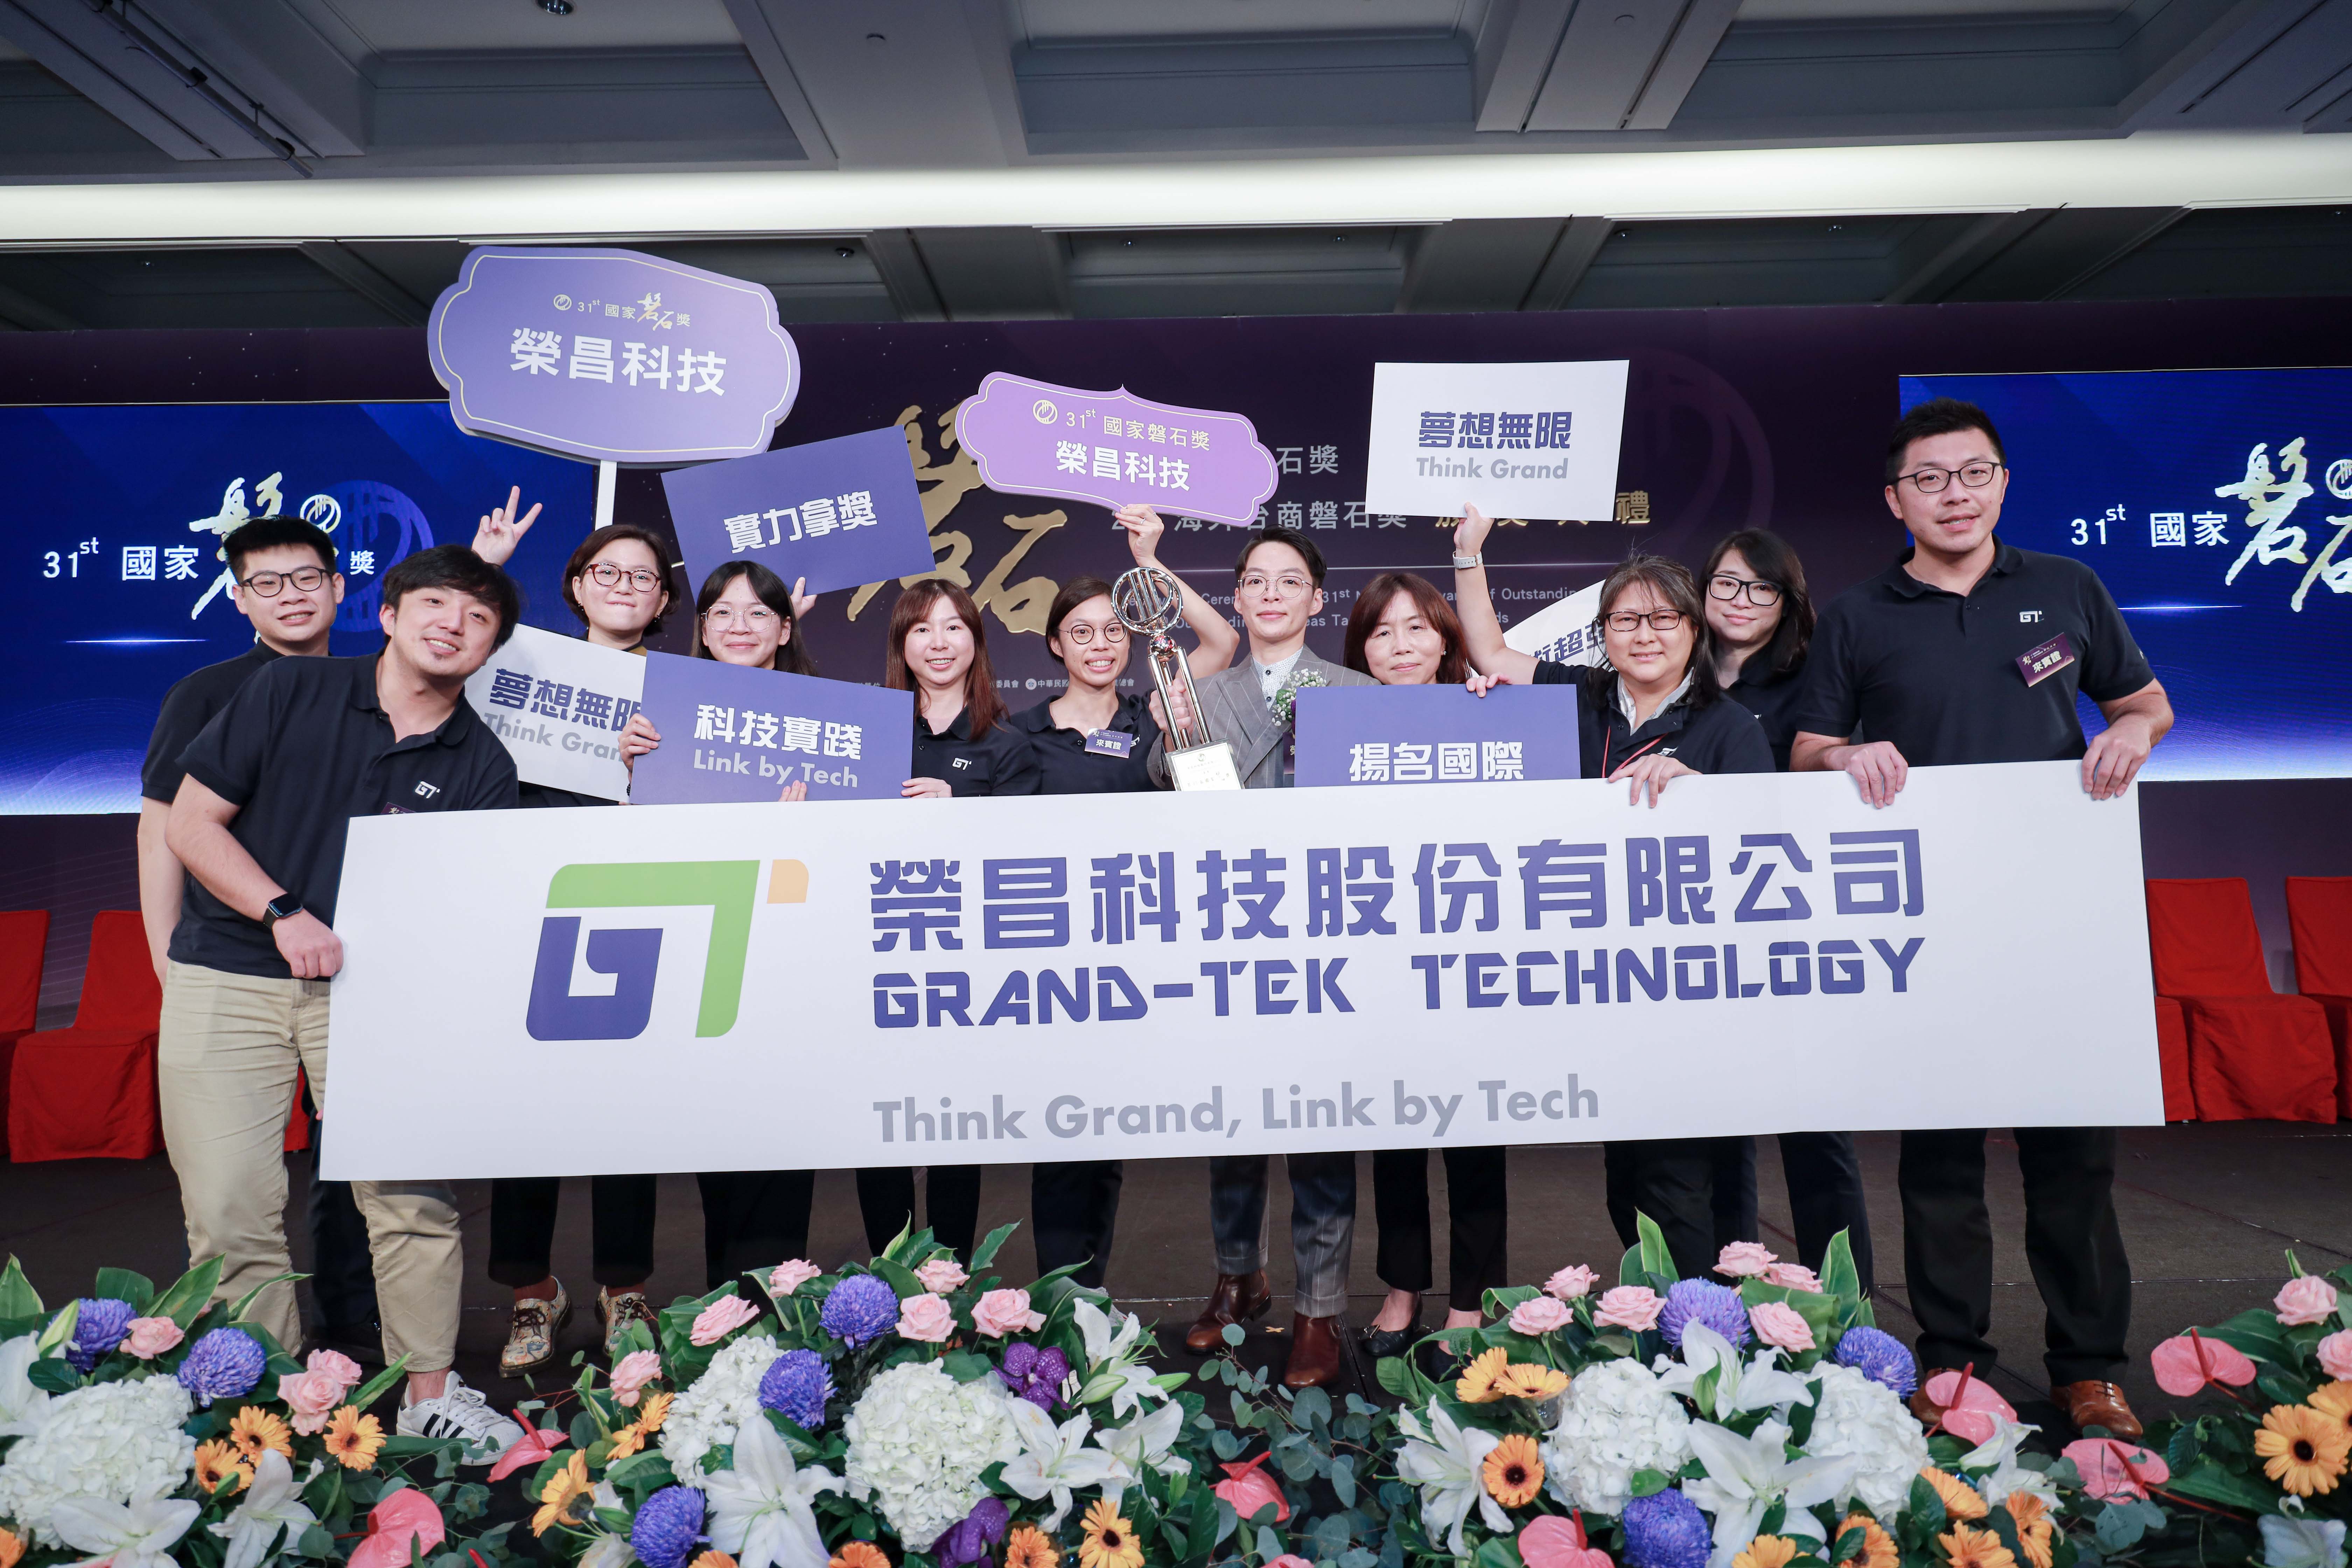 Grand-Tek Technology gets the 31st National Award of Outstanding SMEs, sharing the glory with global partners. - Grand-Tek